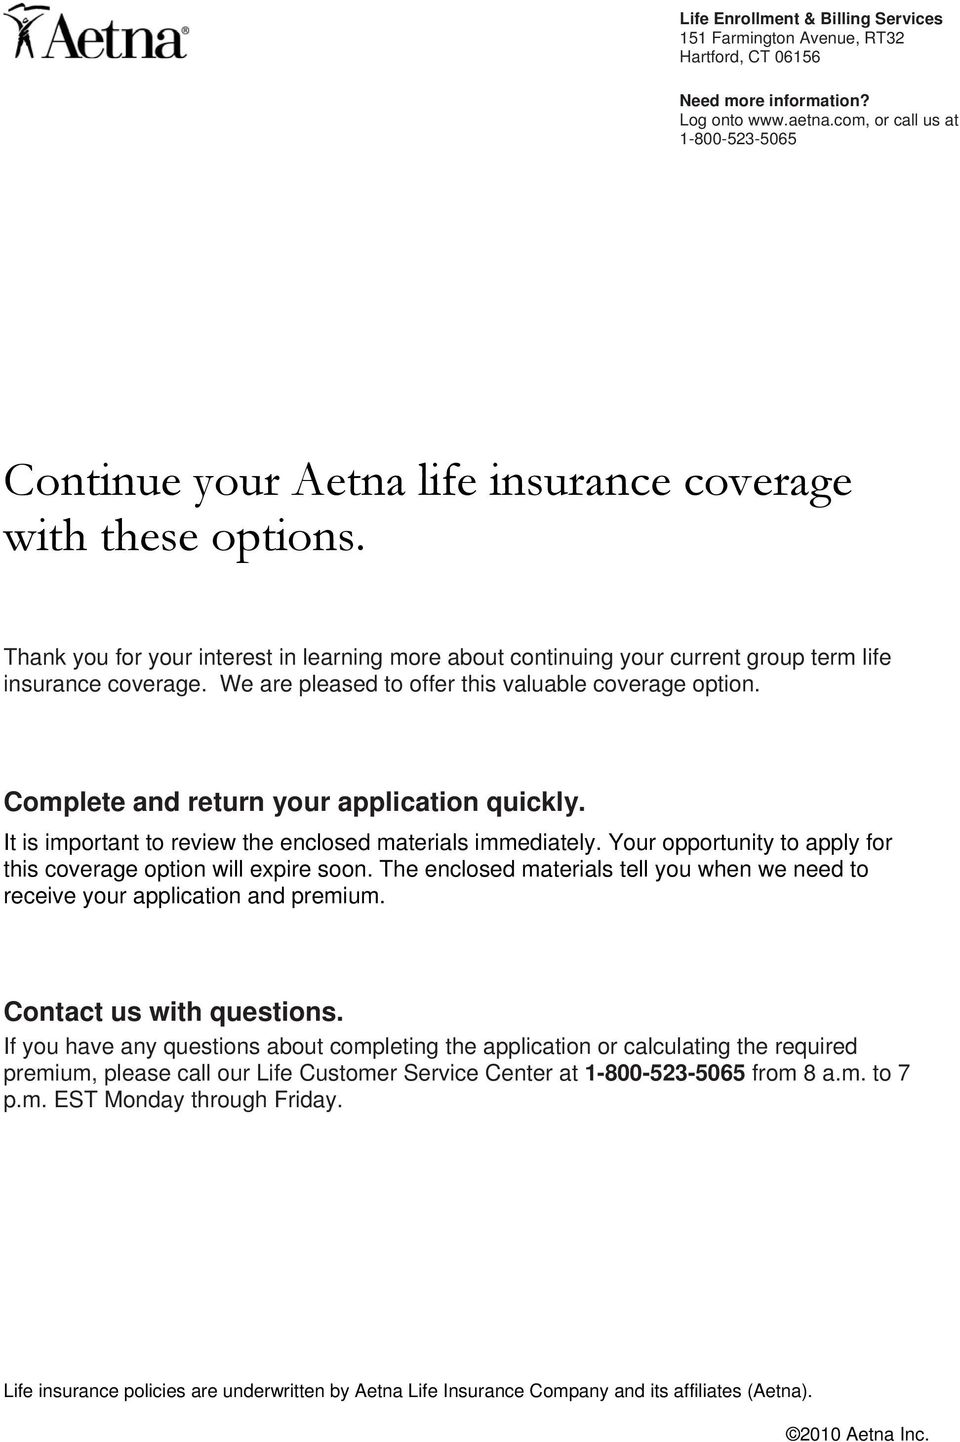 Thank you for your interest in learning more about continuing your current group term life insurance coverage. We are pleased to offer this valuable coverage option.